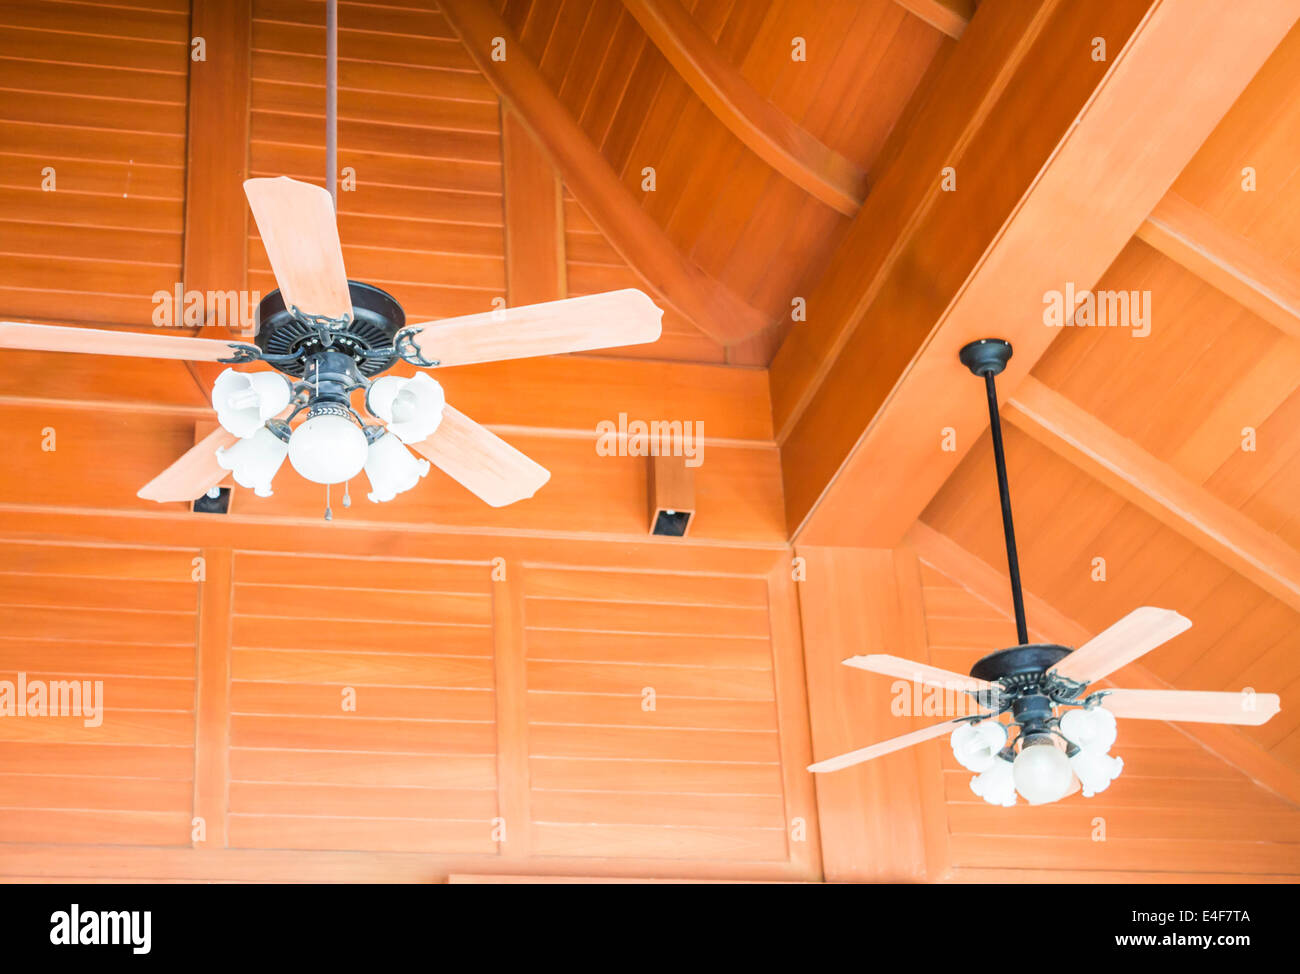 Old style wood ceiling fans with white glass lamps Stock Photo